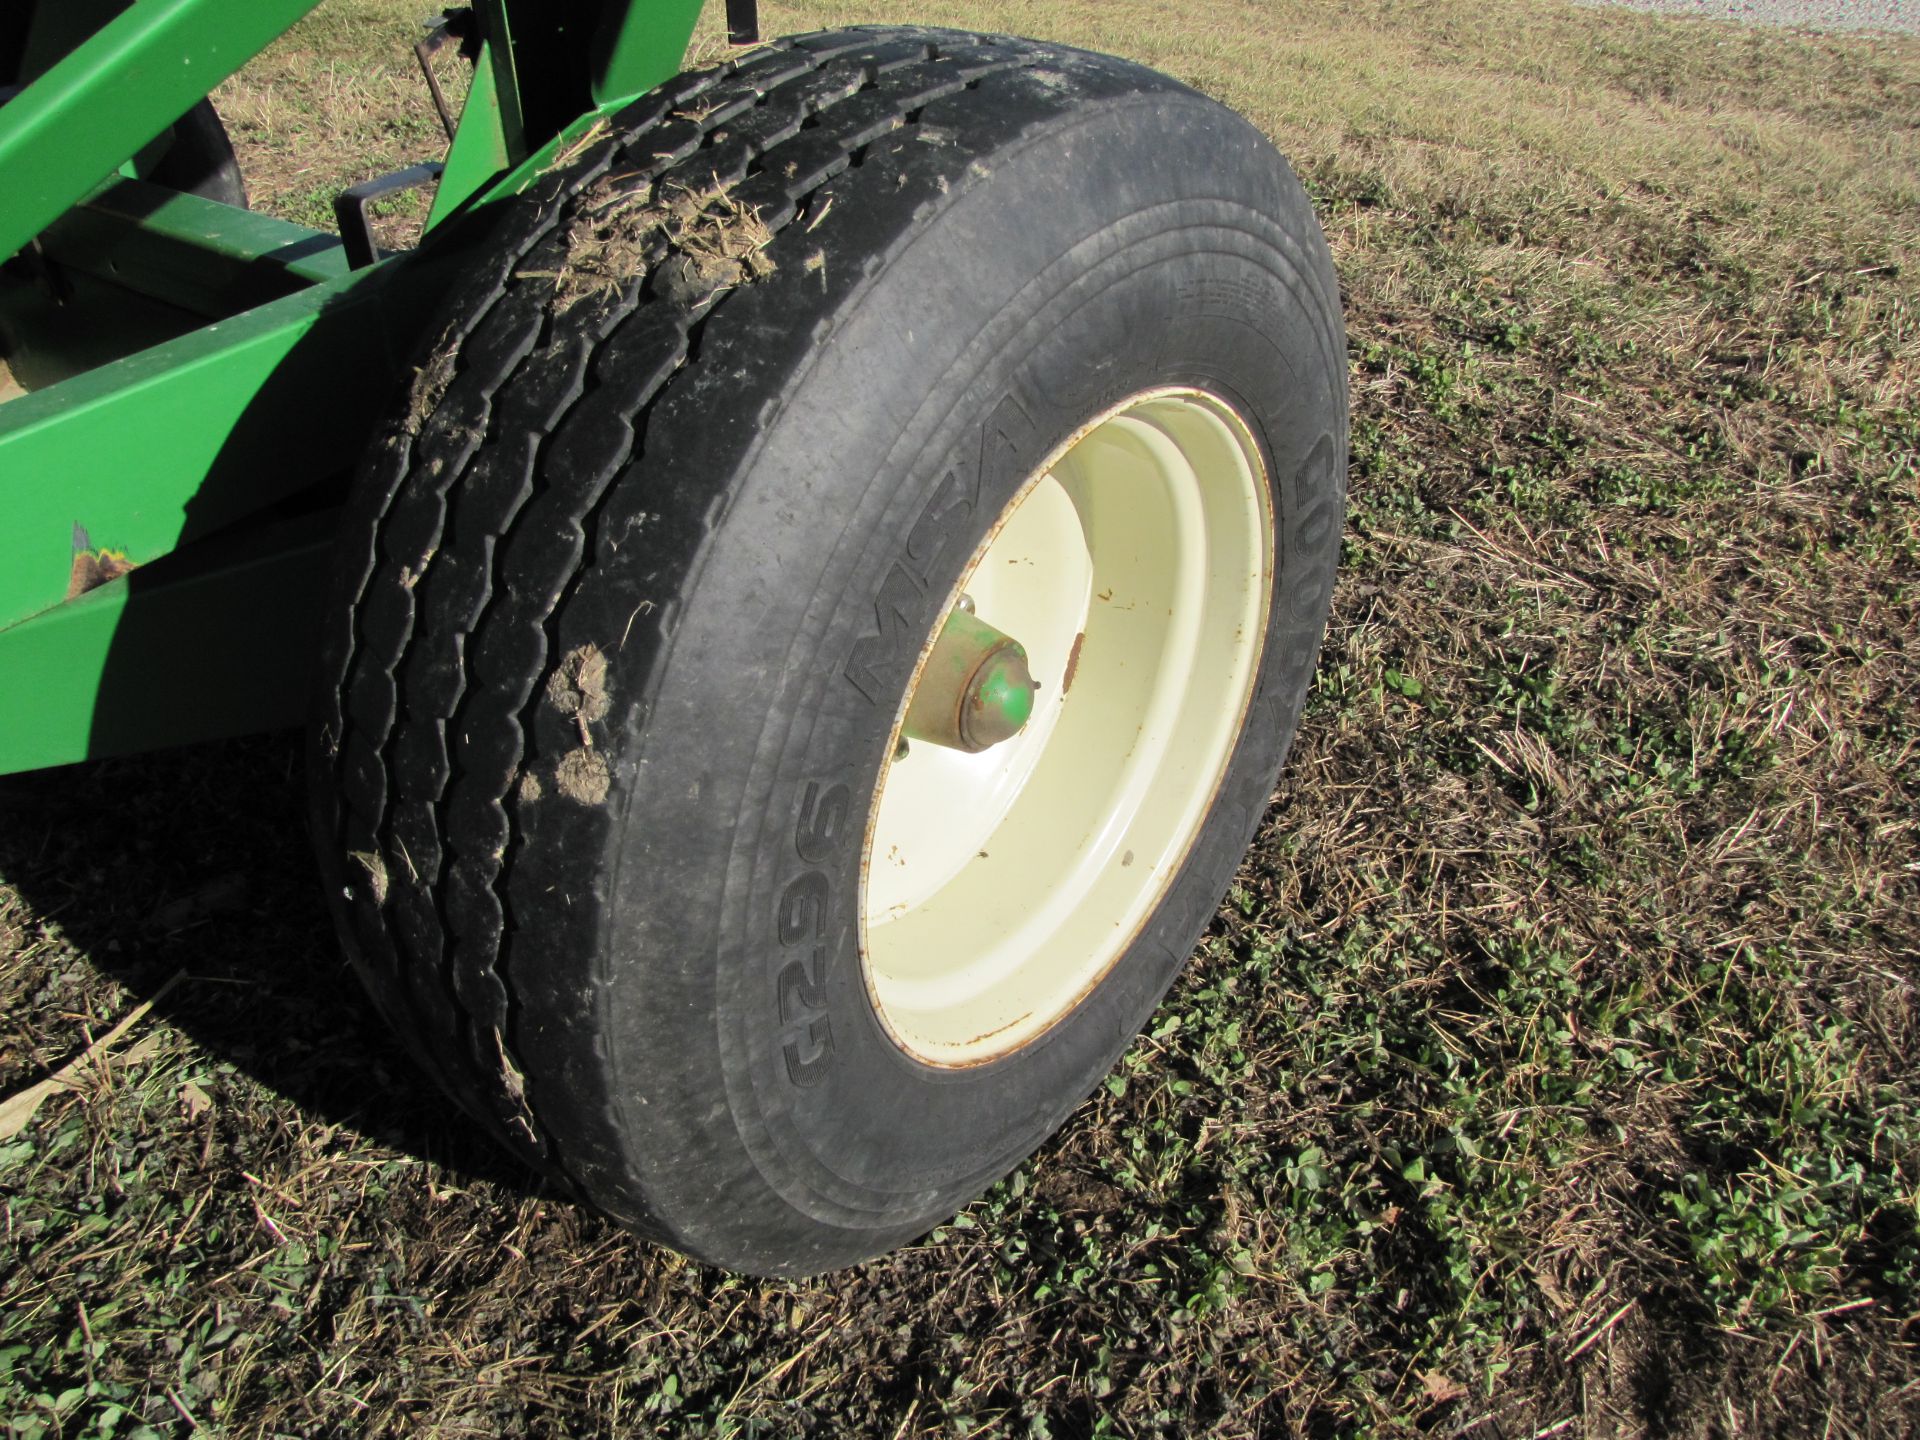 J & M 385 gravity bed wagon, site windows, brakes, light package, 385/65 R 22.5 tires - Image 9 of 18